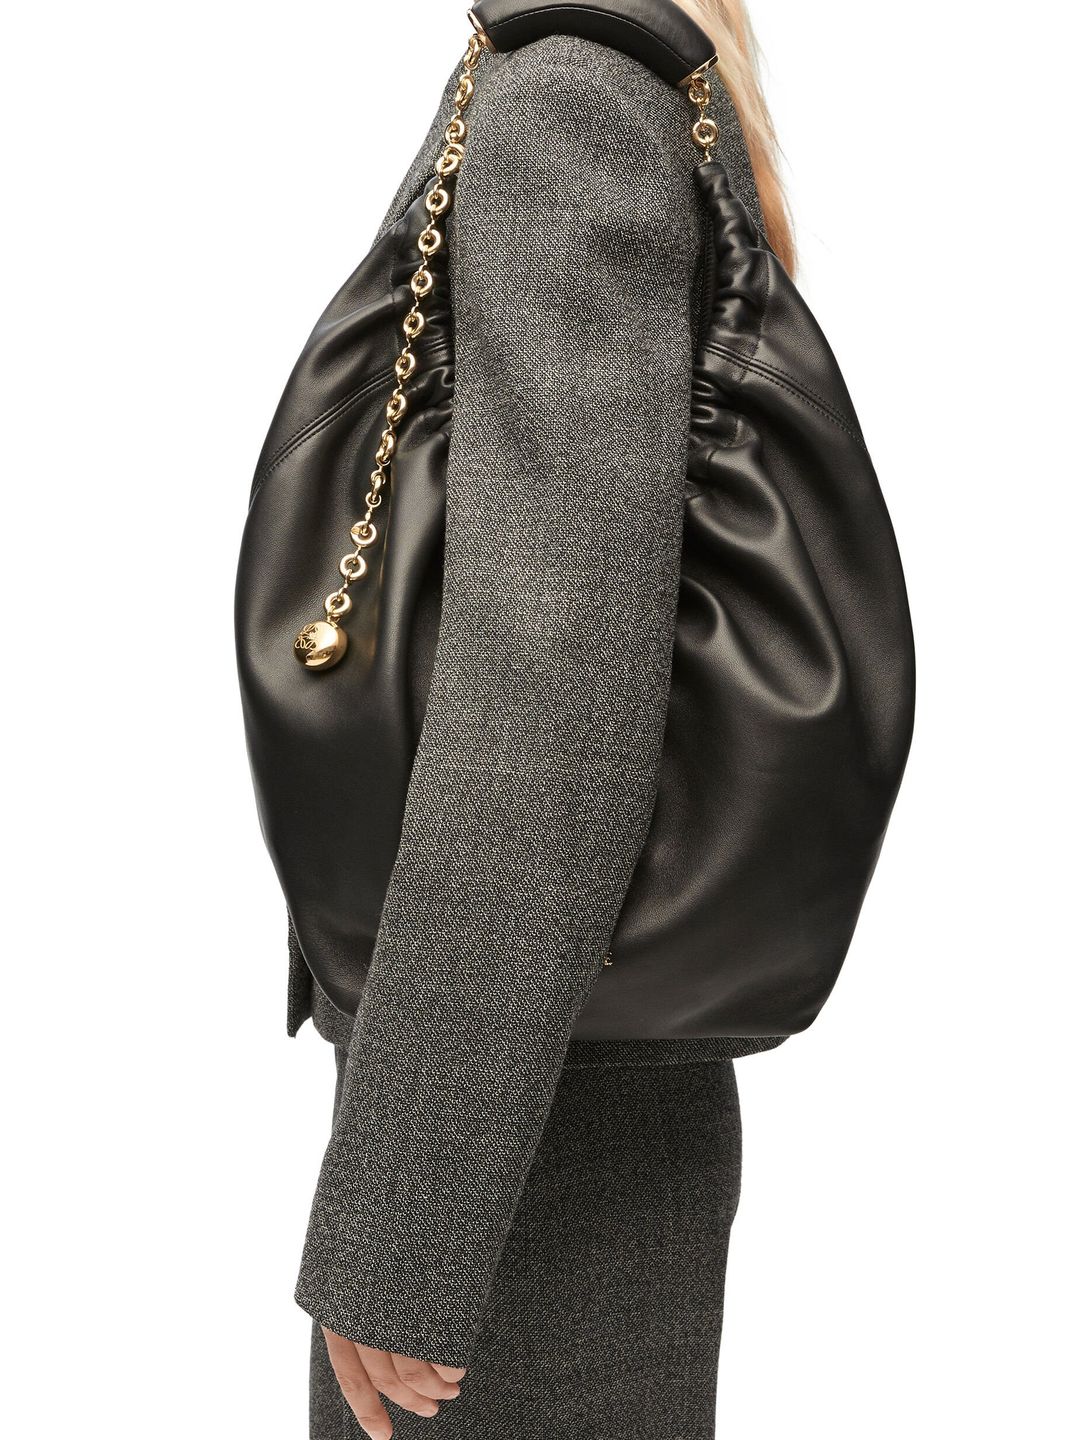 Loewe call the Squeeze bag "a masterpiece of traditional craftsmanship"